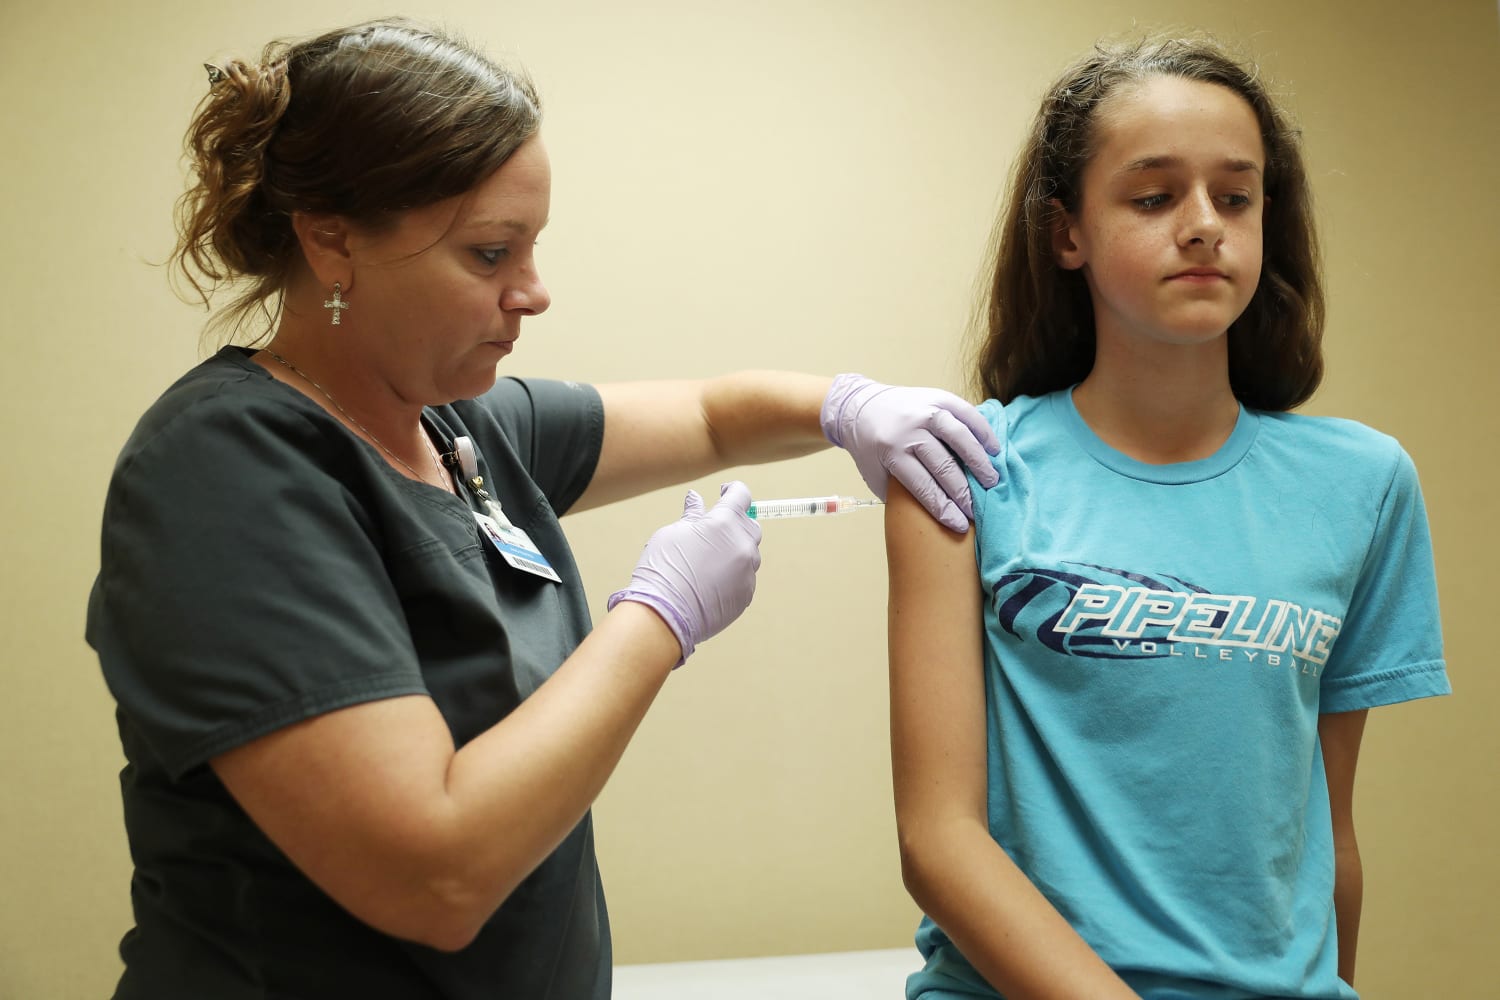 hpv vaccine gives cancer